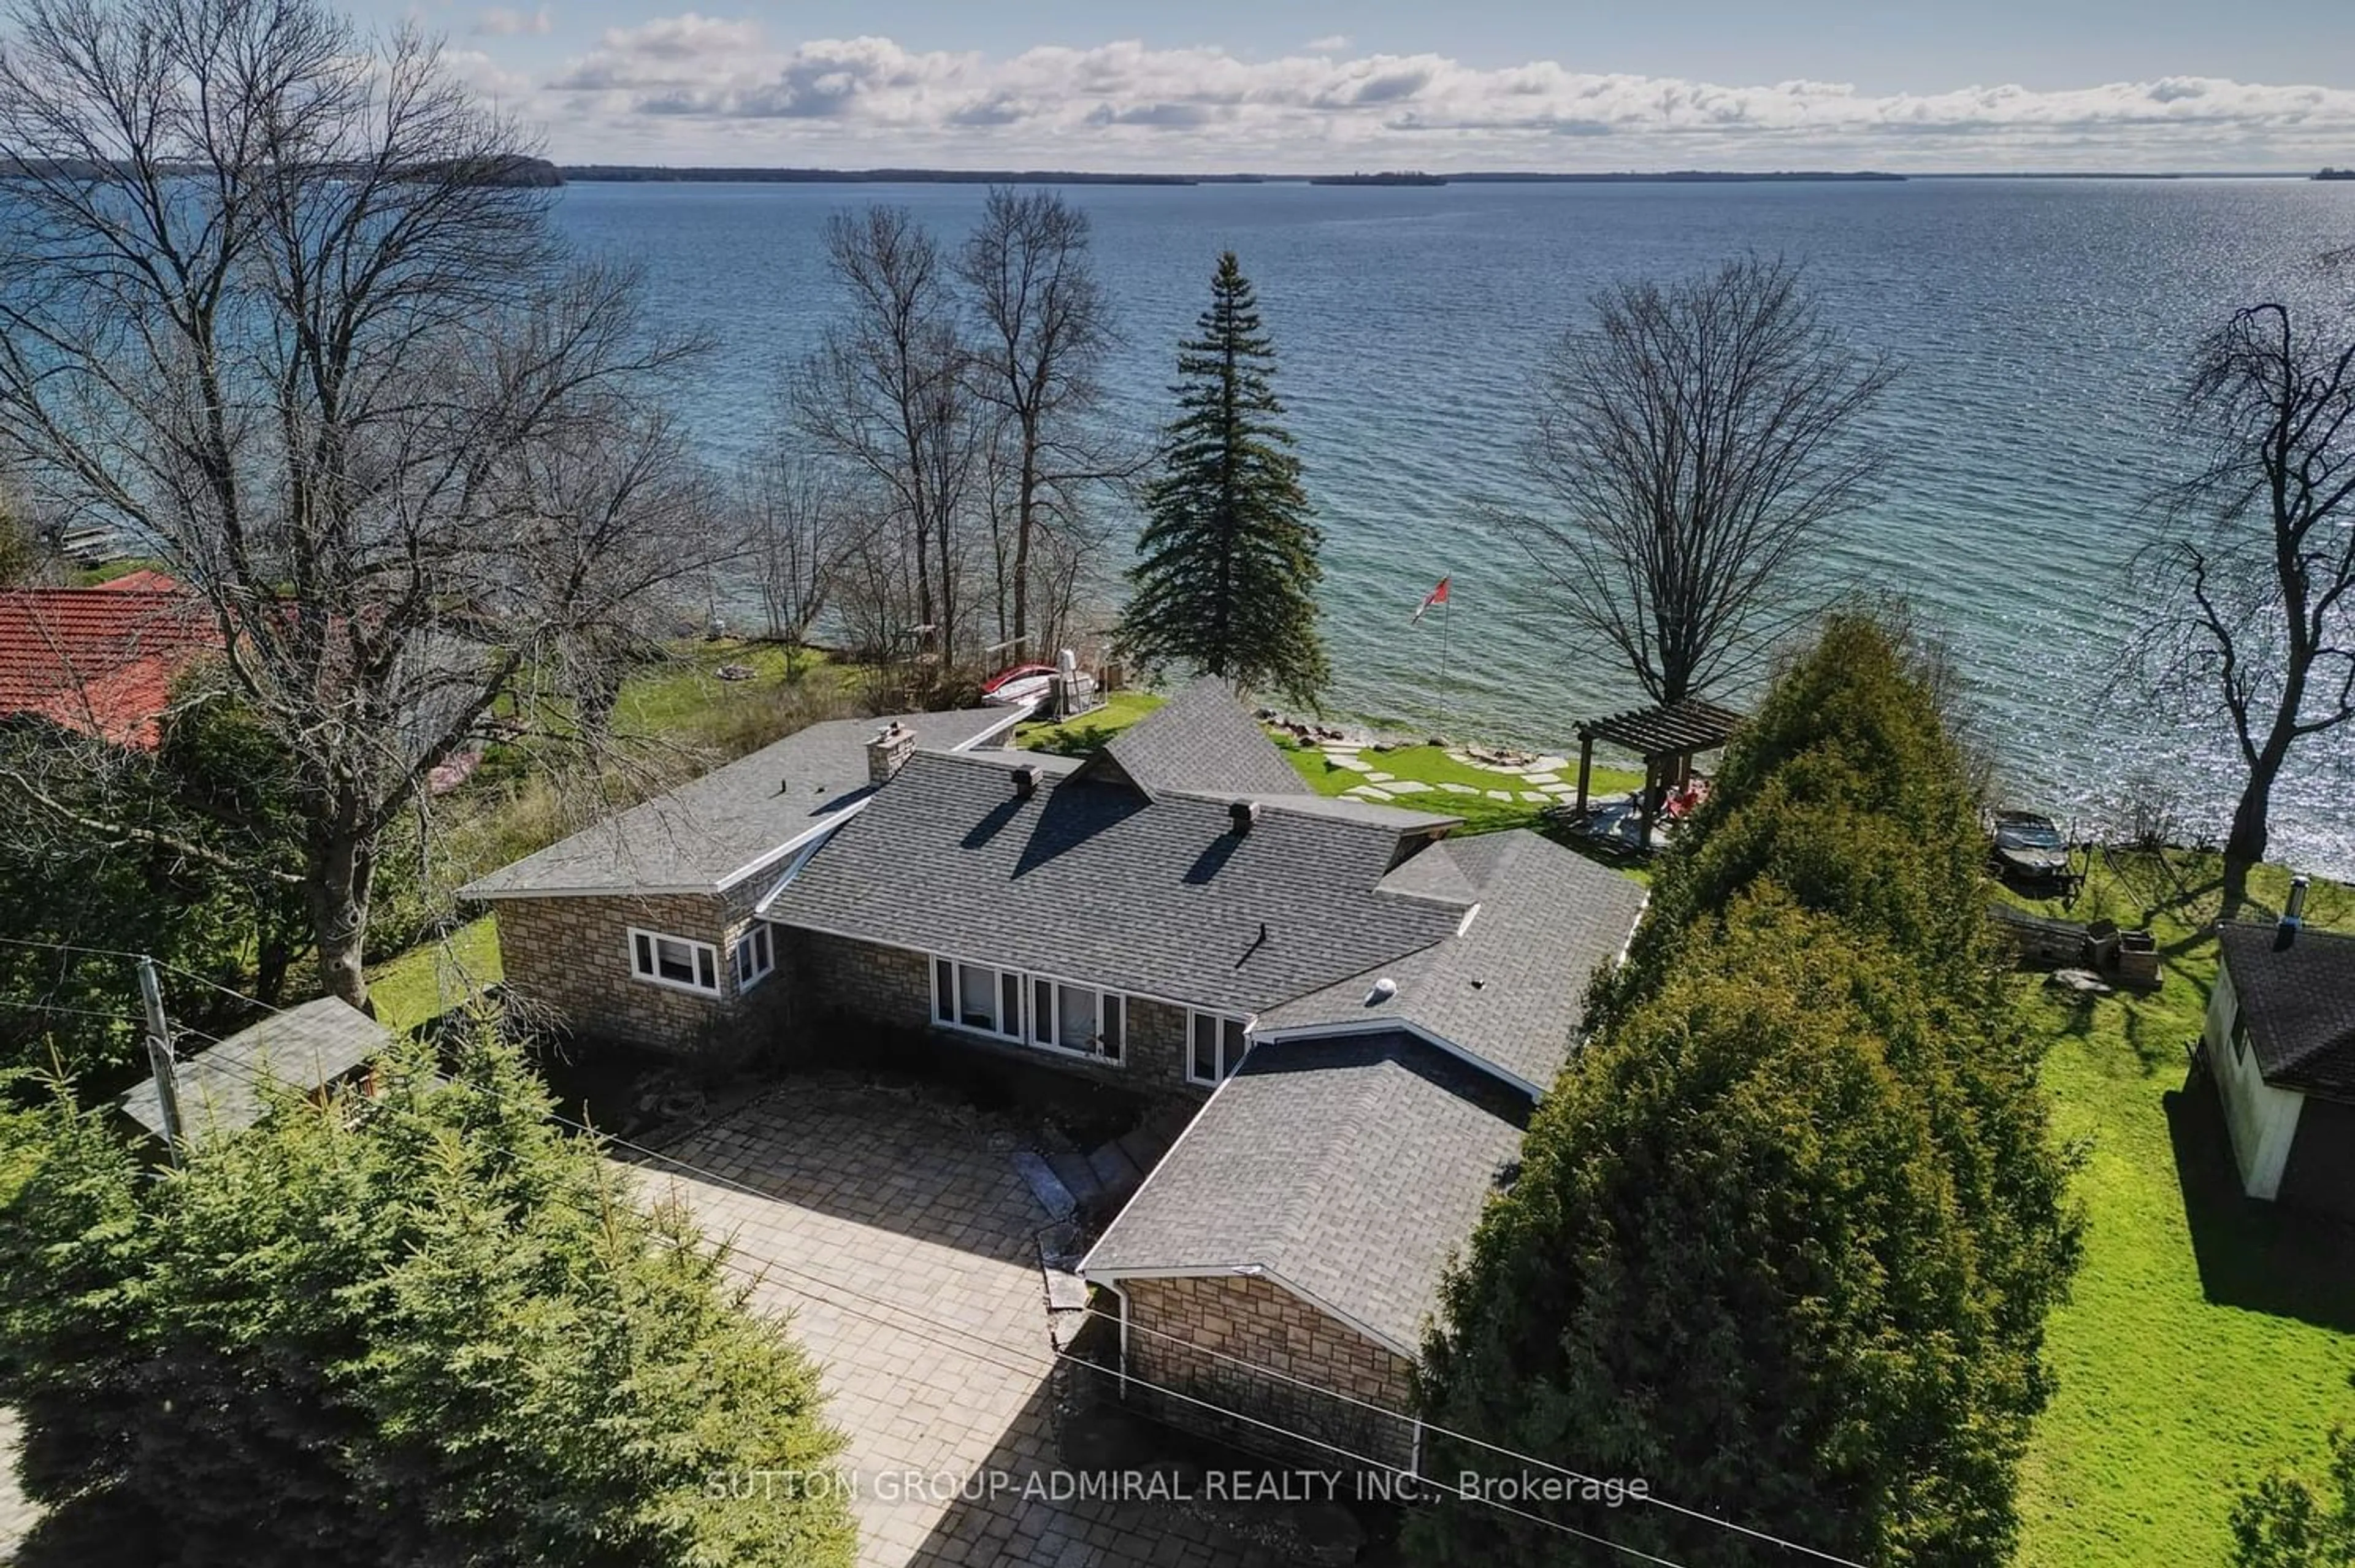 Lakeview for 259 Moon Point Dr, Oro-Medonte Ontario L3V 6H1